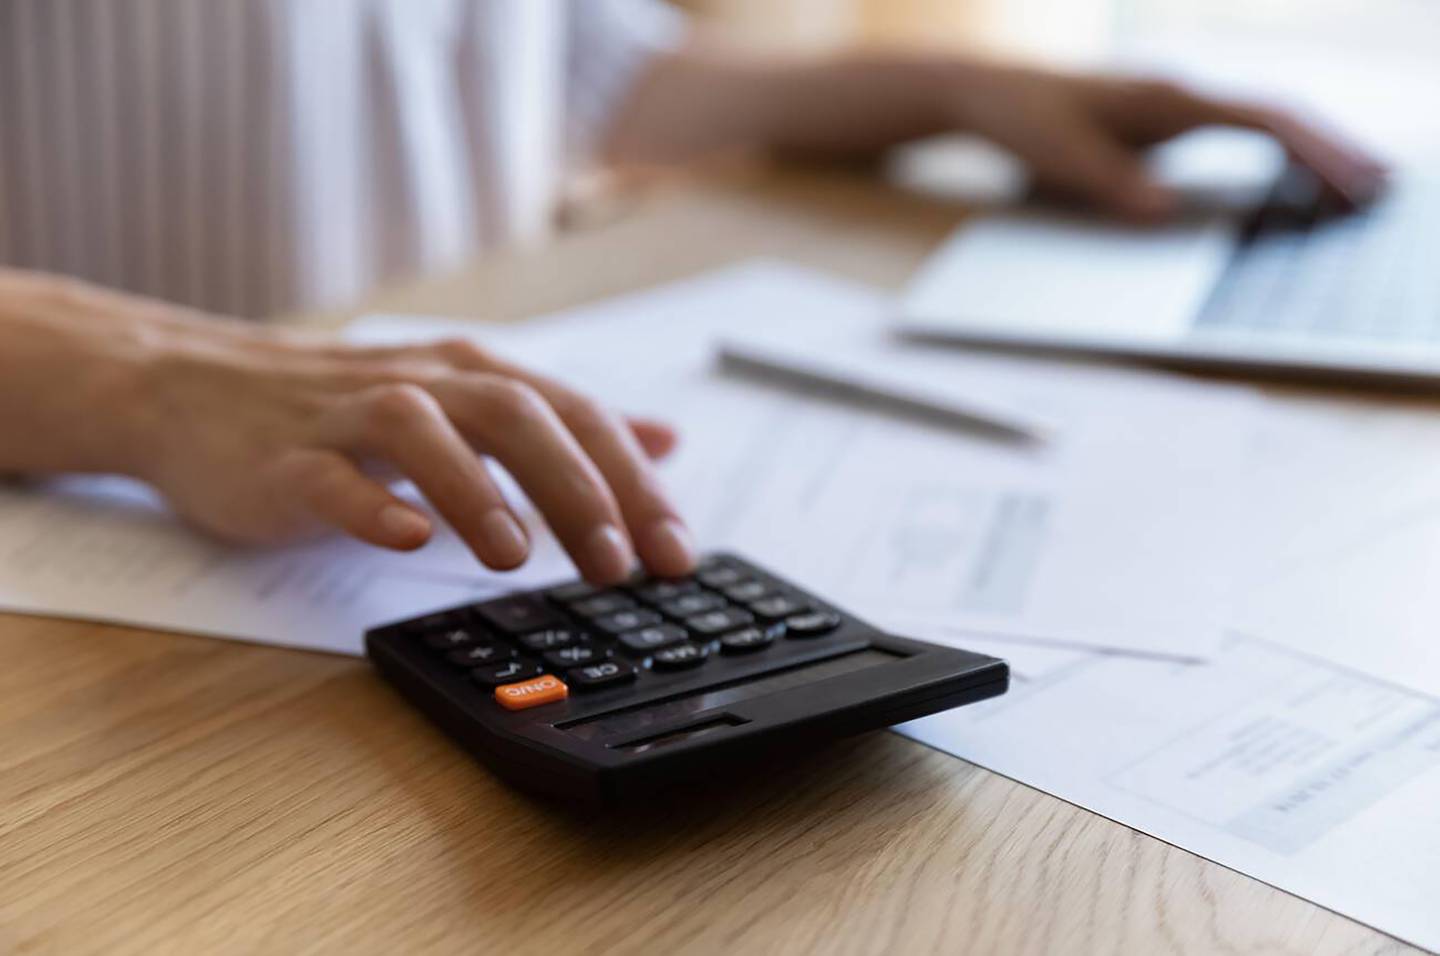 Budgeting is a useful tool that can help you calculate income and expenses to provide a dashboard view of your financial situation and find ways to reduce or manage your spending. Alamy